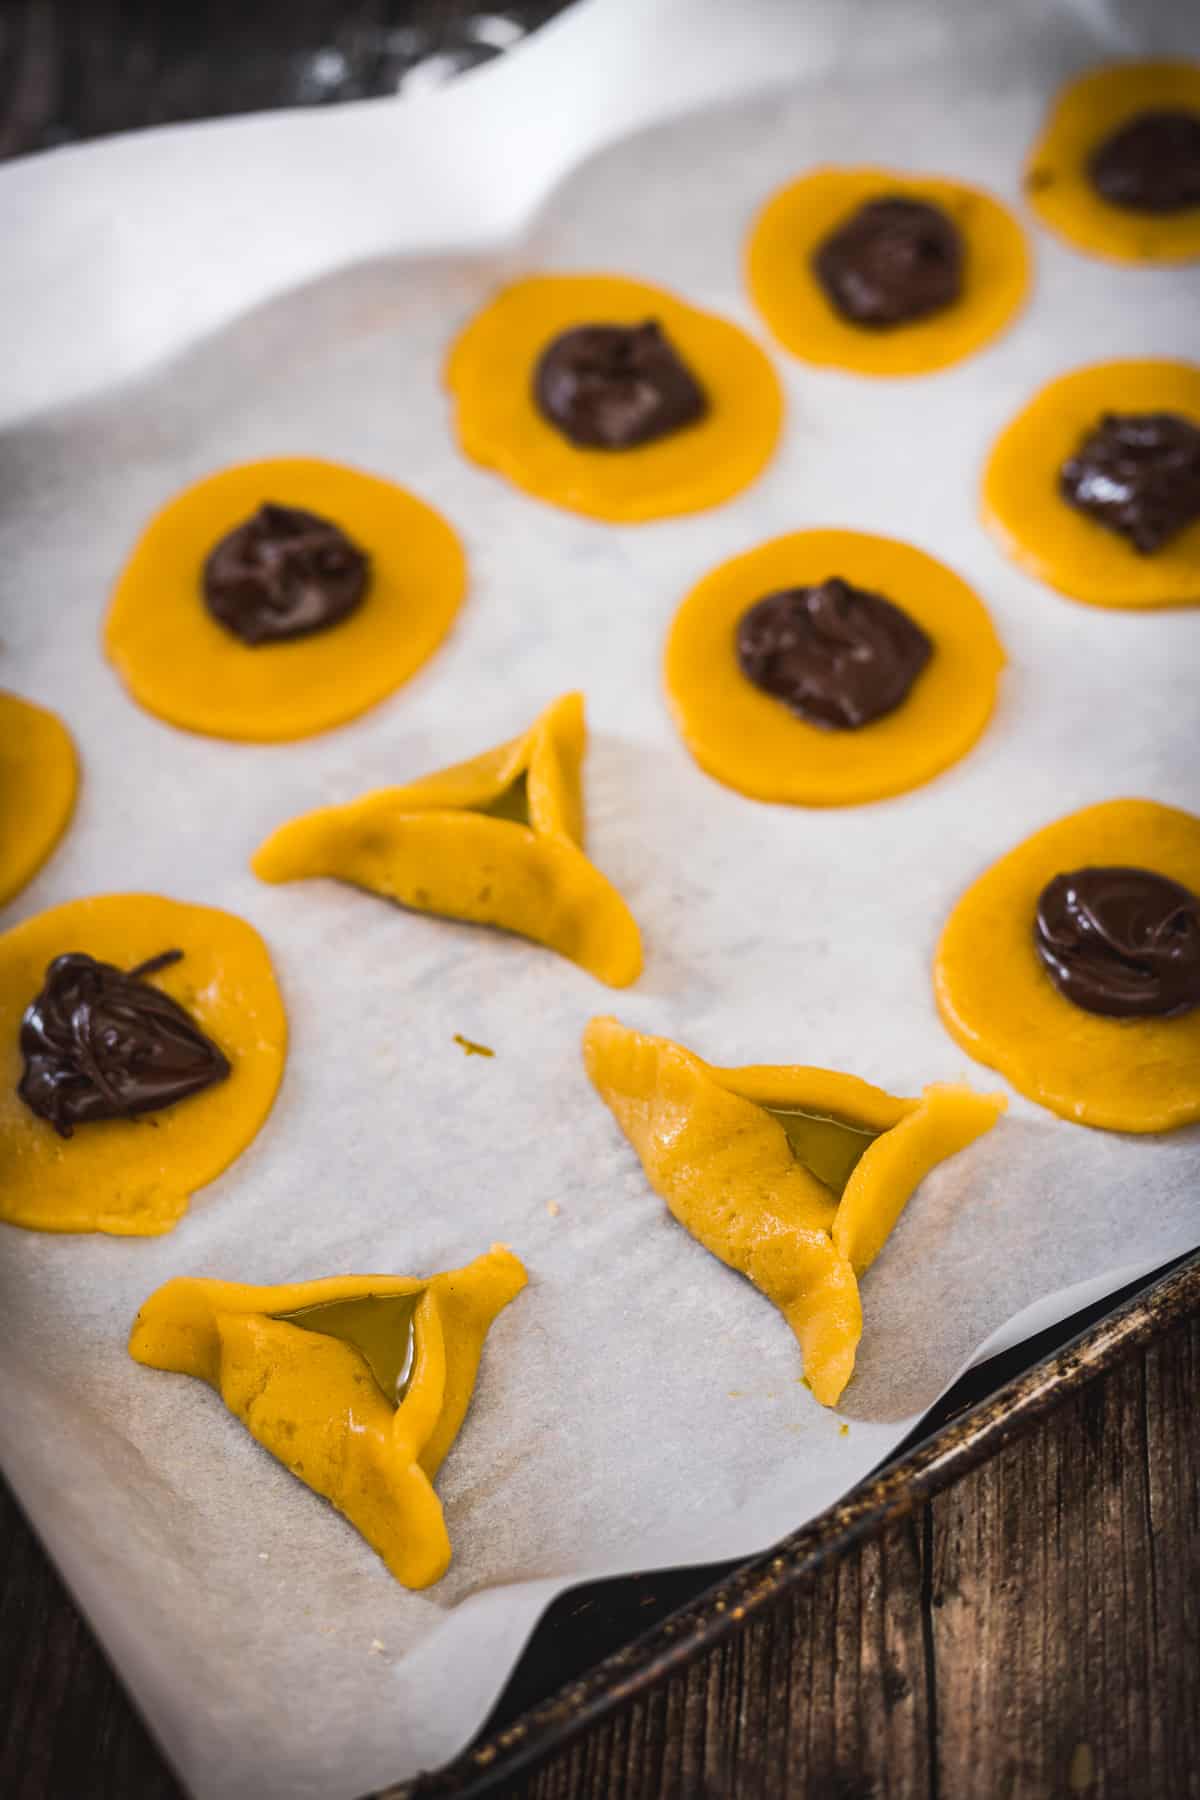 Unbaked Rose Pistachio Hamantaschen on parchment paper, with some shaped into crescents and others awaiting folding.